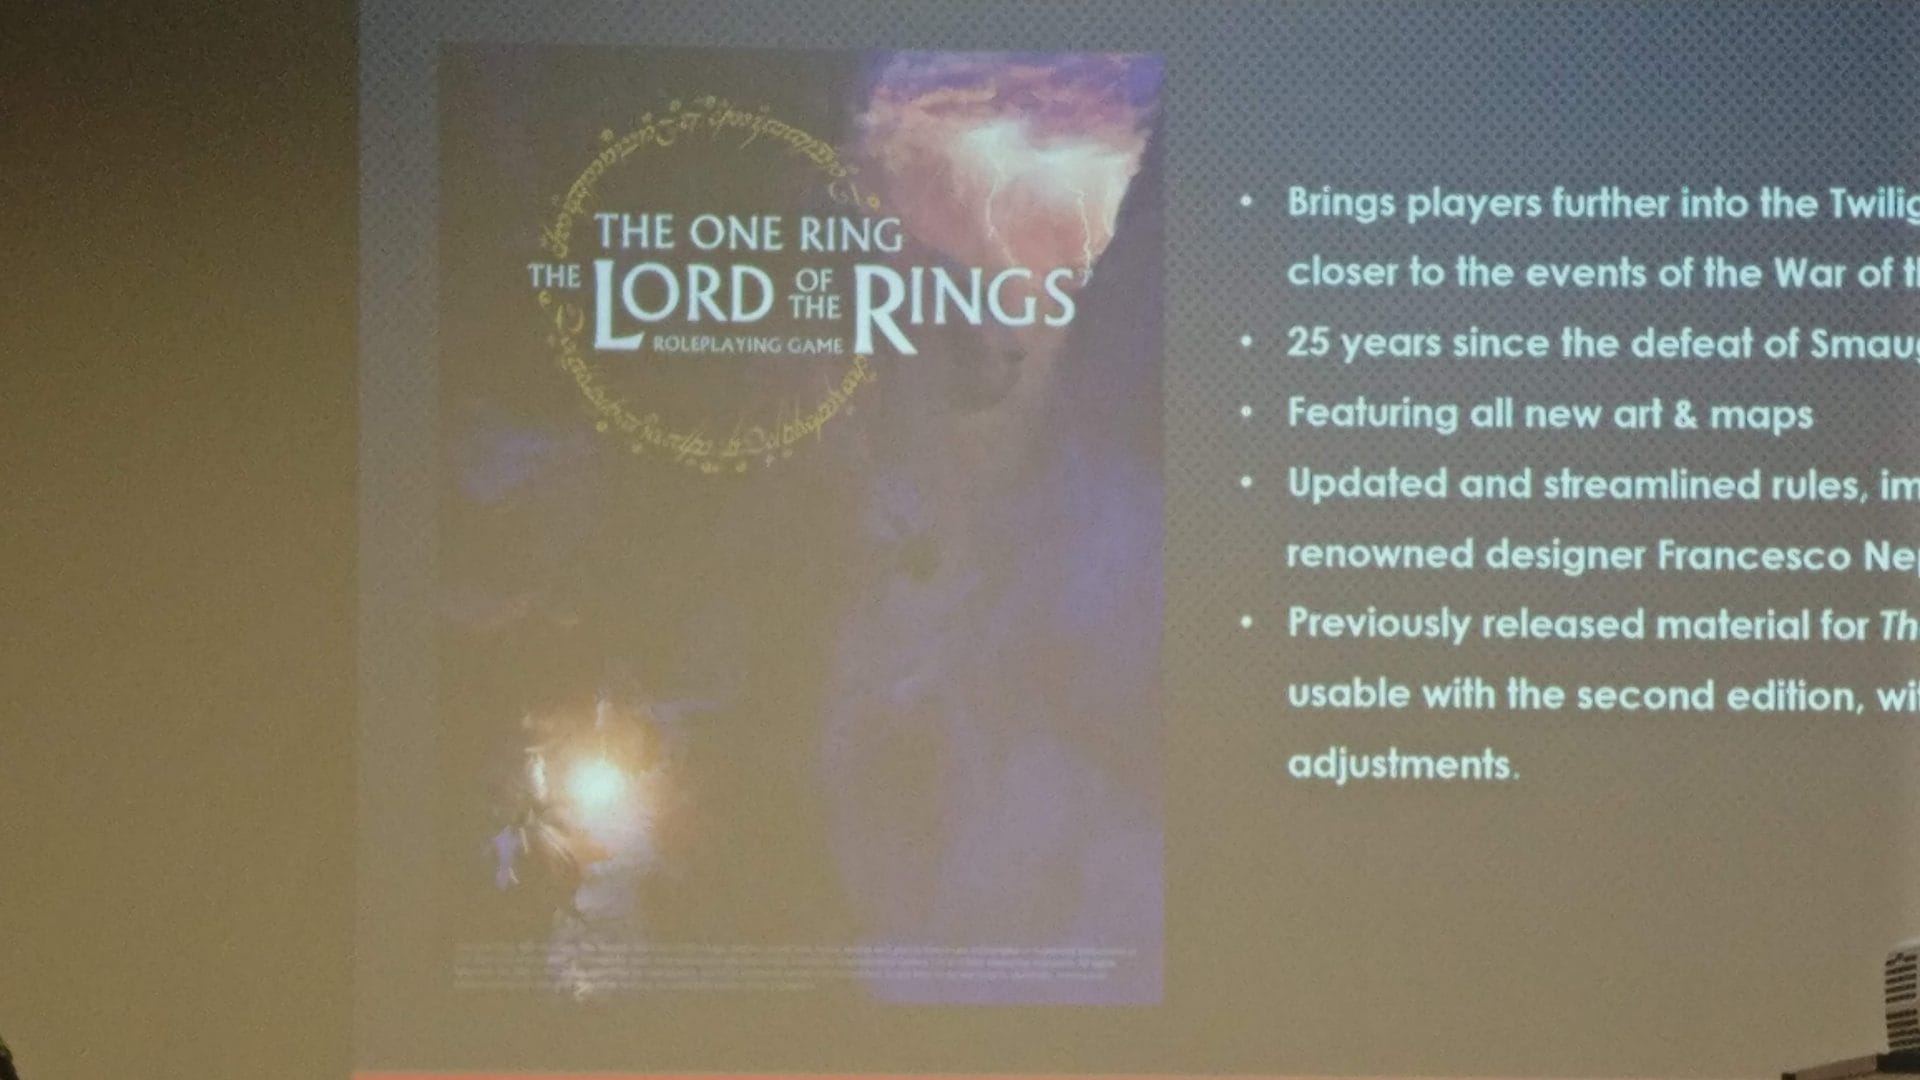 Lord of the Rings 2e cover reveal